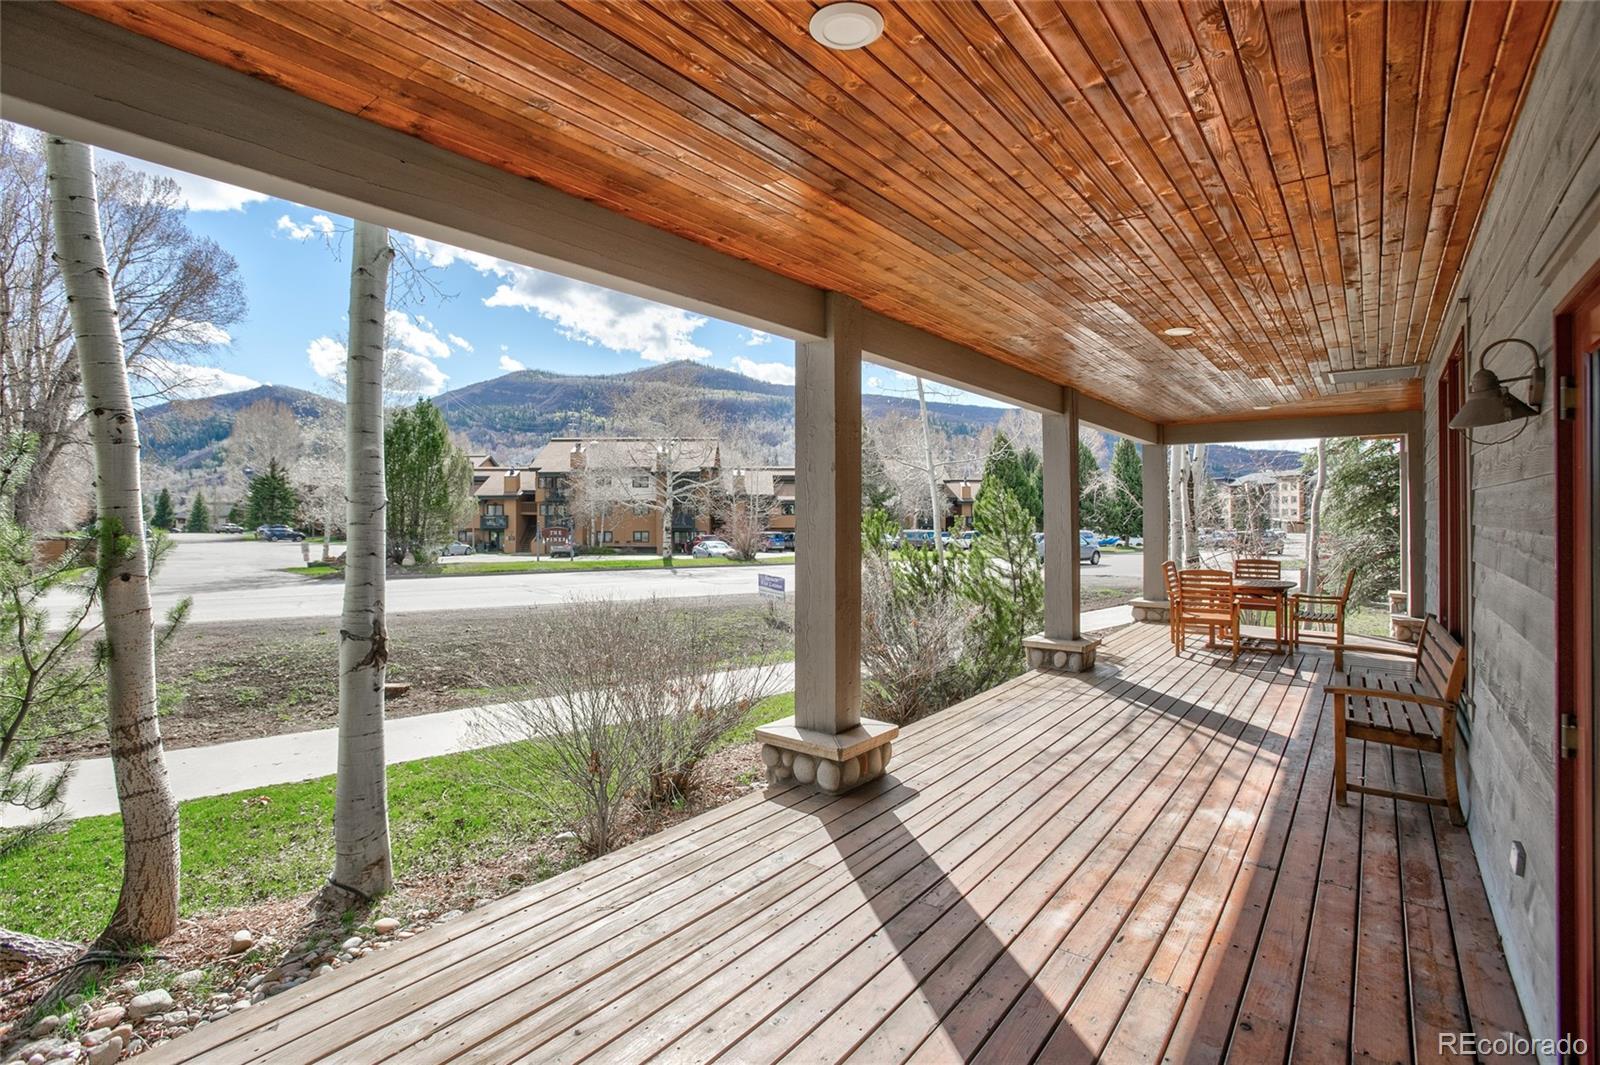 1600 Pine Grove, Steamboat Springs, CO